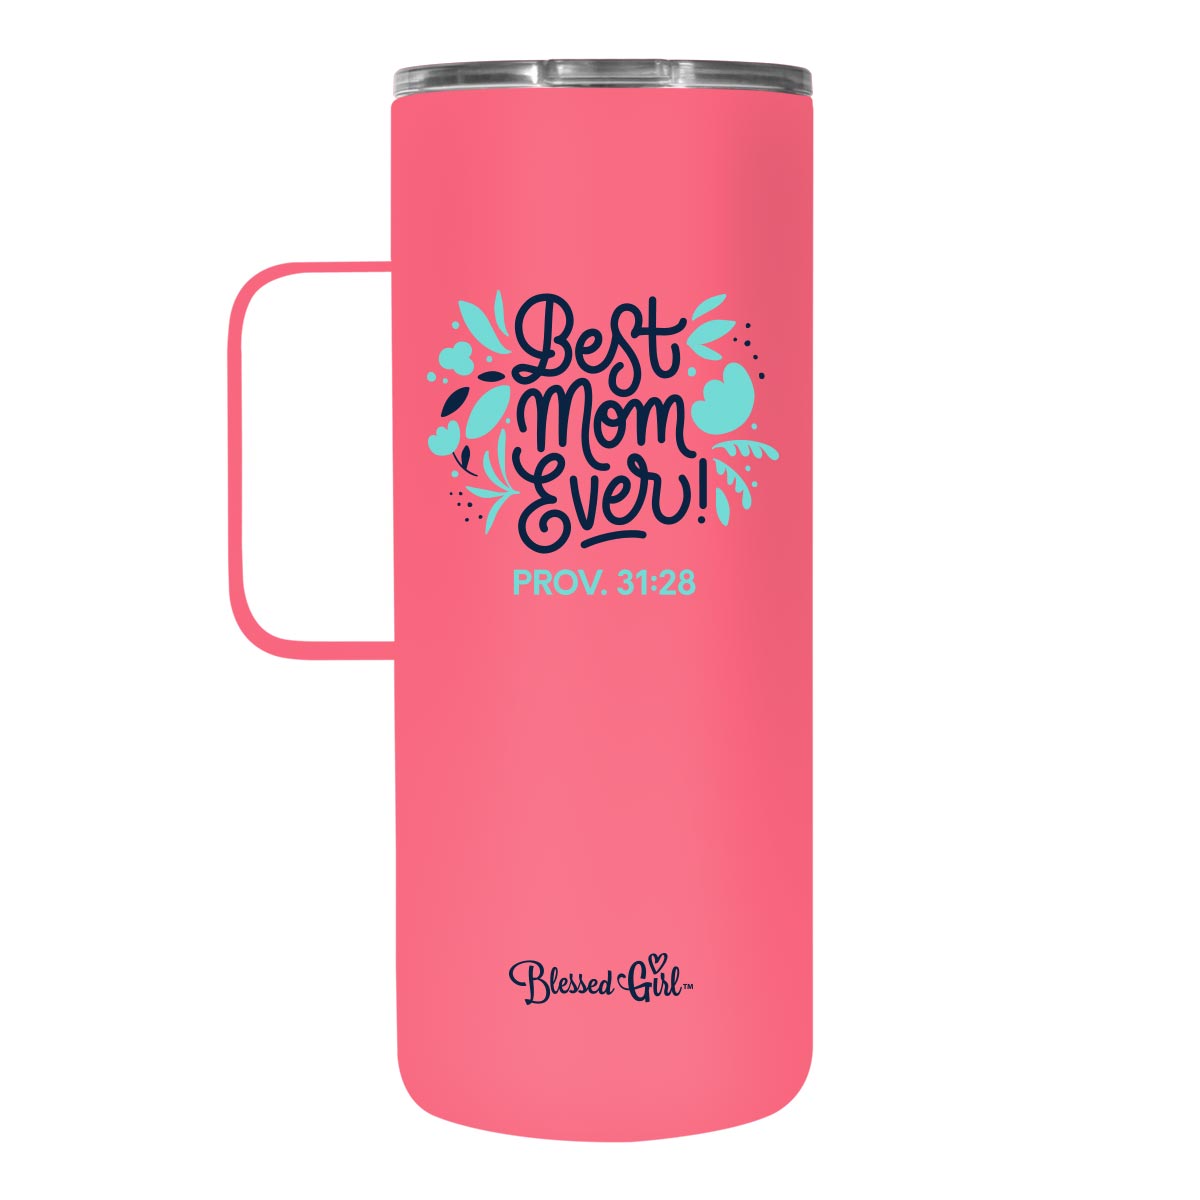 Blessed Girl 22 oz Stainless Steel Mug With Handle Best Mom